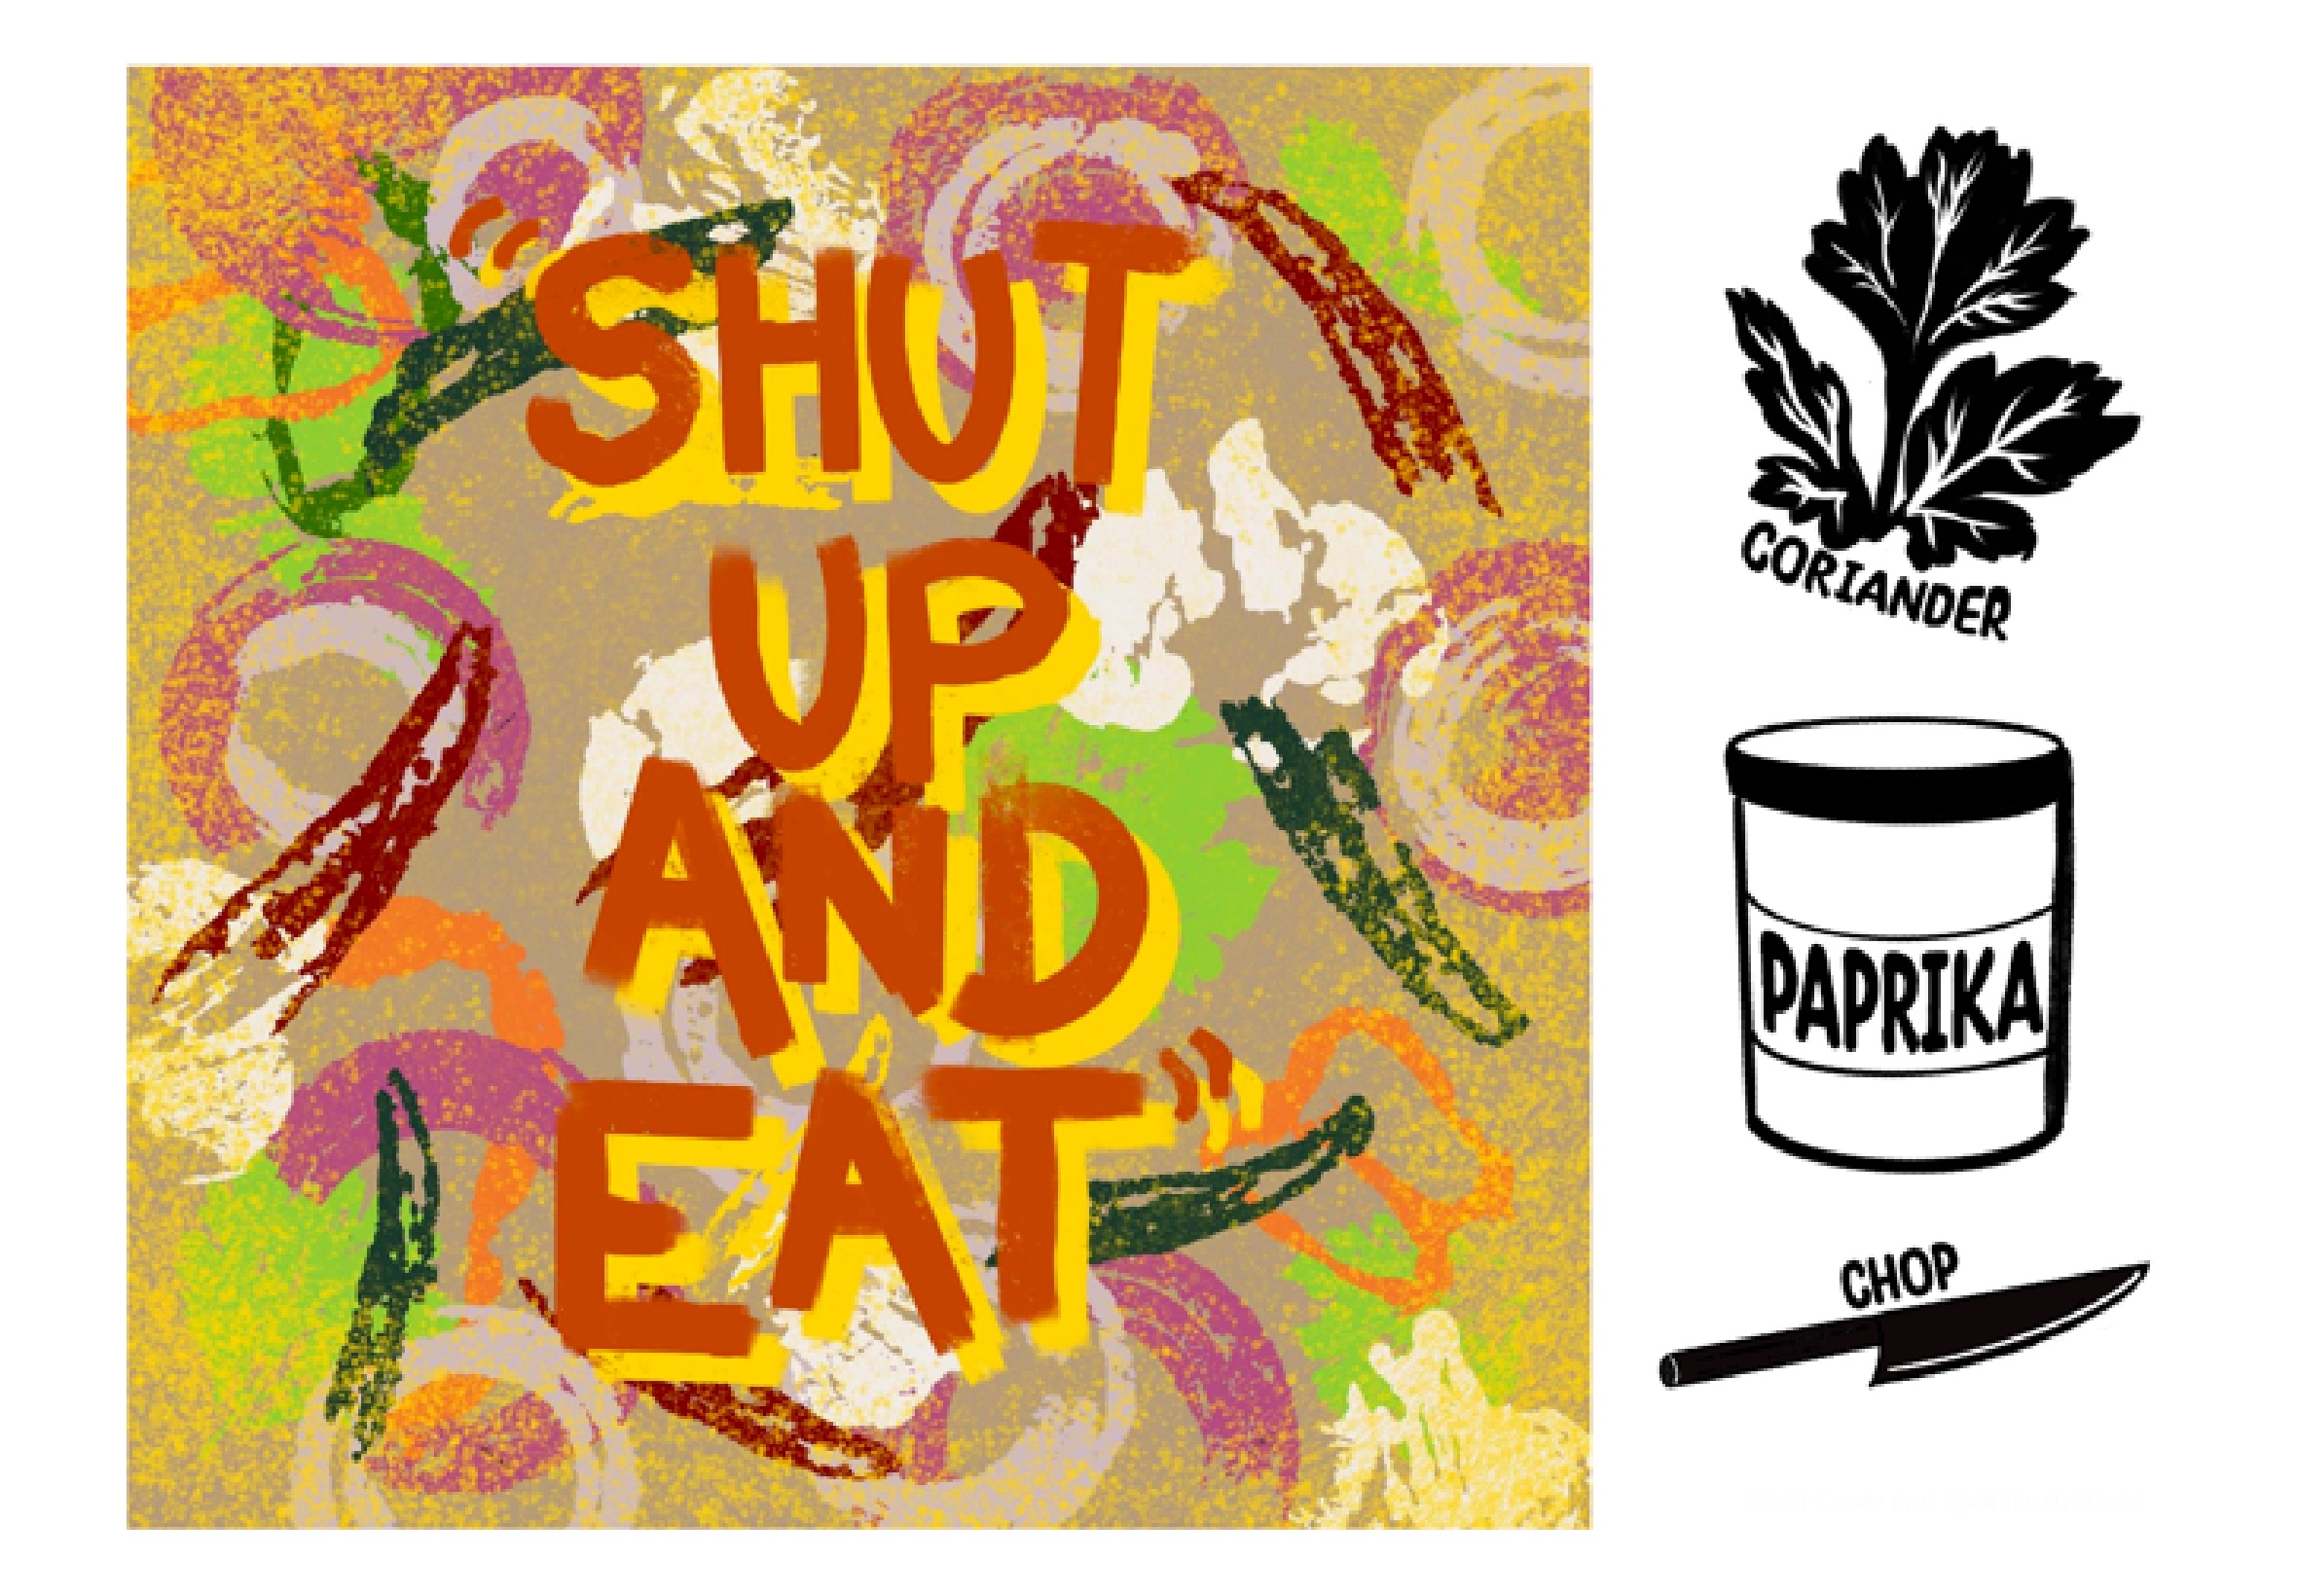 Book Cover by Farjana Khatun showing the title Shut Up And Eat. Monoprinted vegetables with hand rendered typography.